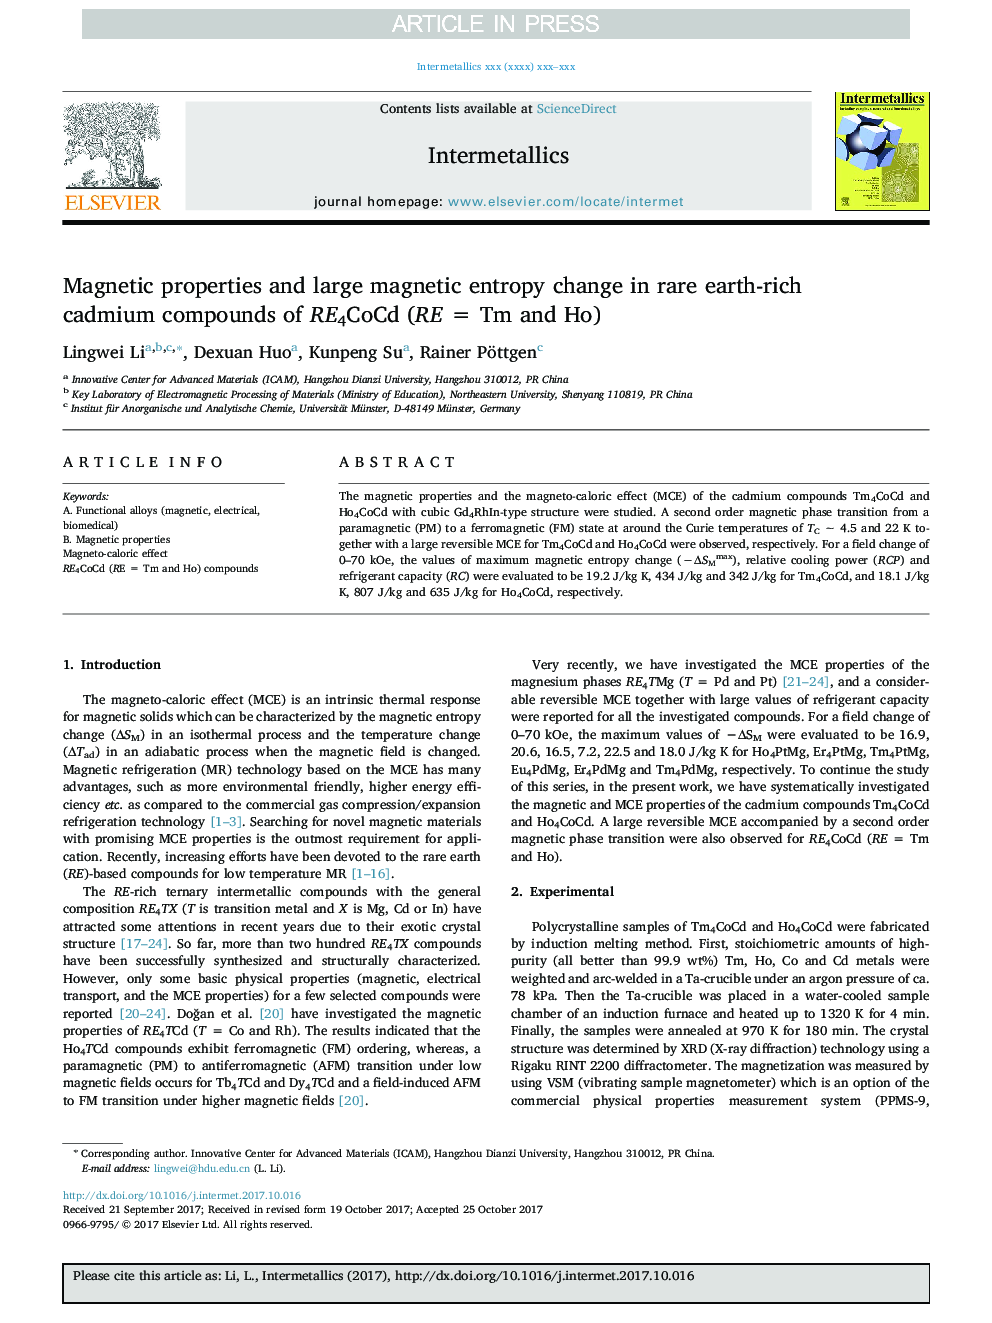 Magnetic properties and large magnetic entropy change in rare earth-rich cadmium compounds of RE4CoCd (RE = Tm and Ho)